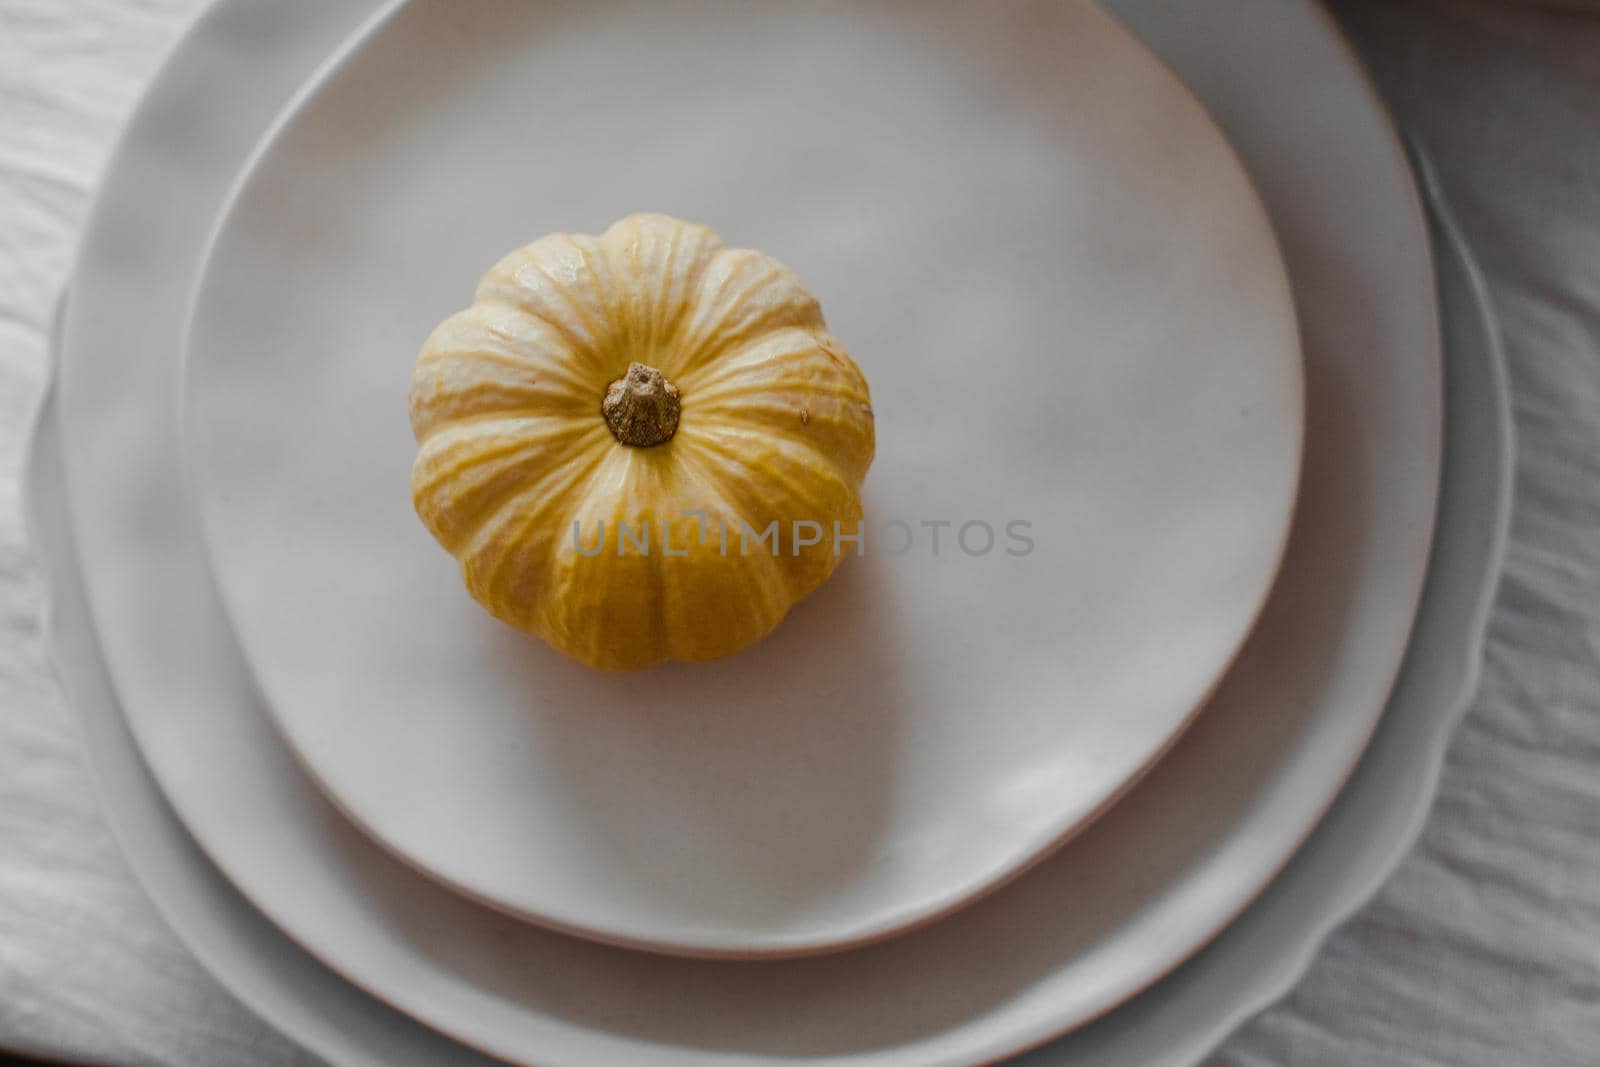 Lovely tiny yellow pumpkin placed on the top of a pile of plates on the table